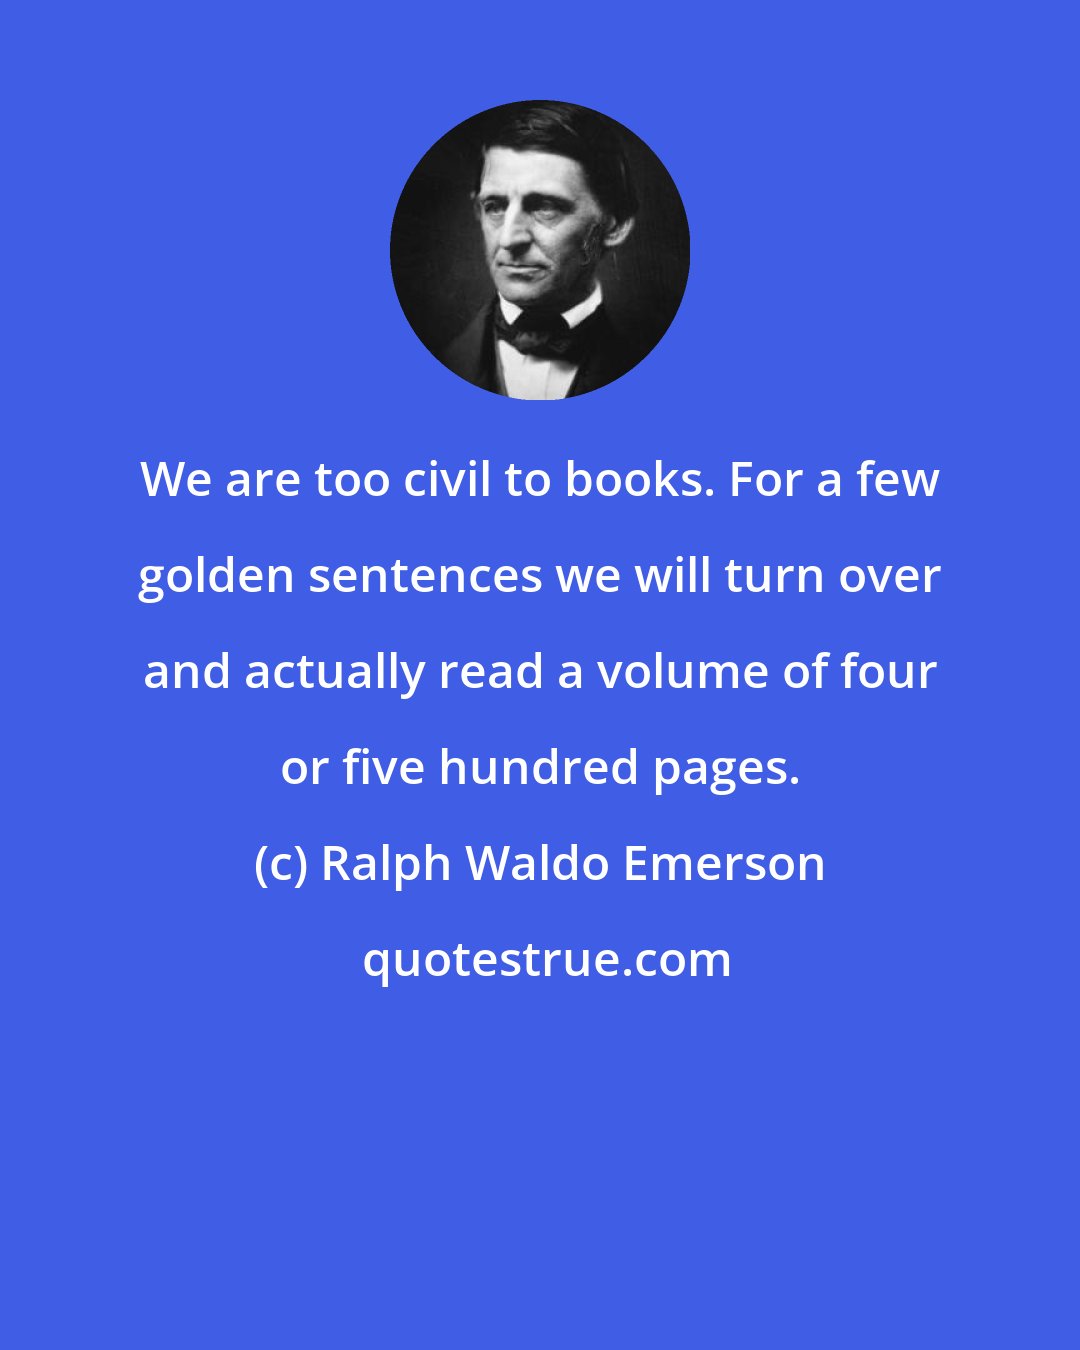 Ralph Waldo Emerson: We are too civil to books. For a few golden sentences we will turn over and actually read a volume of four or five hundred pages.